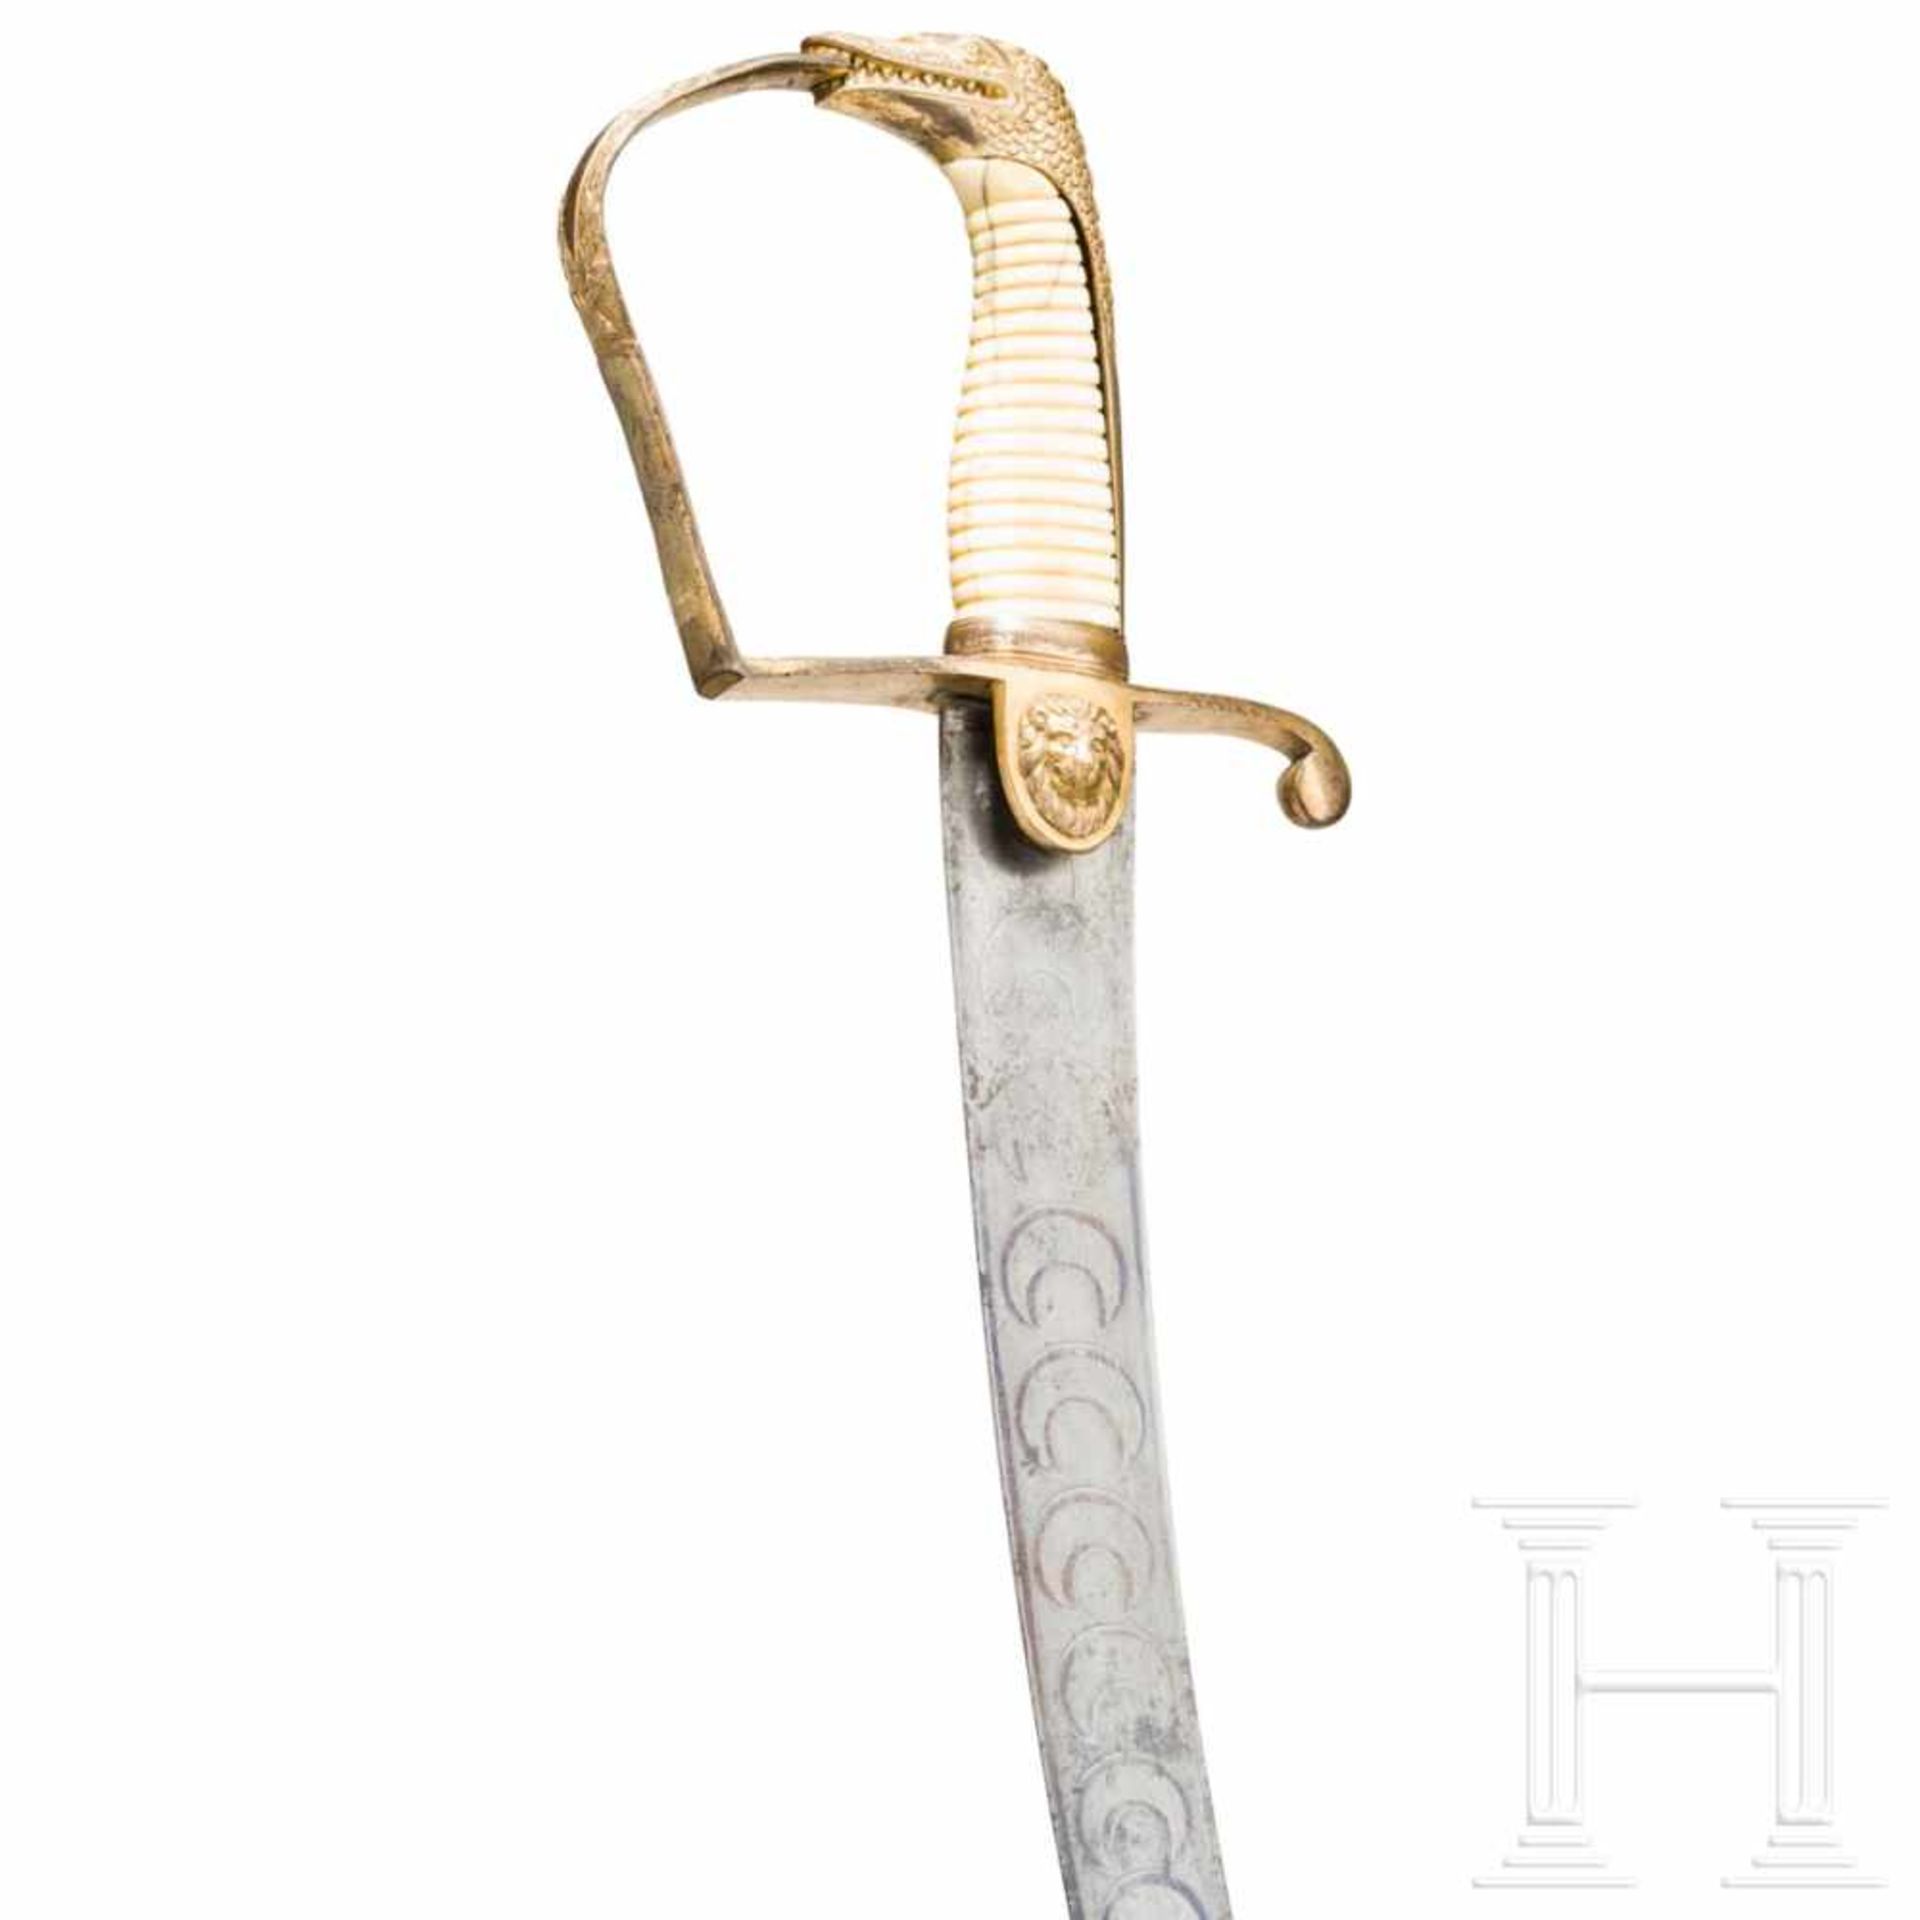 A sabre for officers of the Royal Navy in the style of the so-called “Nile swords“, 1798Distinctly - Bild 3 aus 10